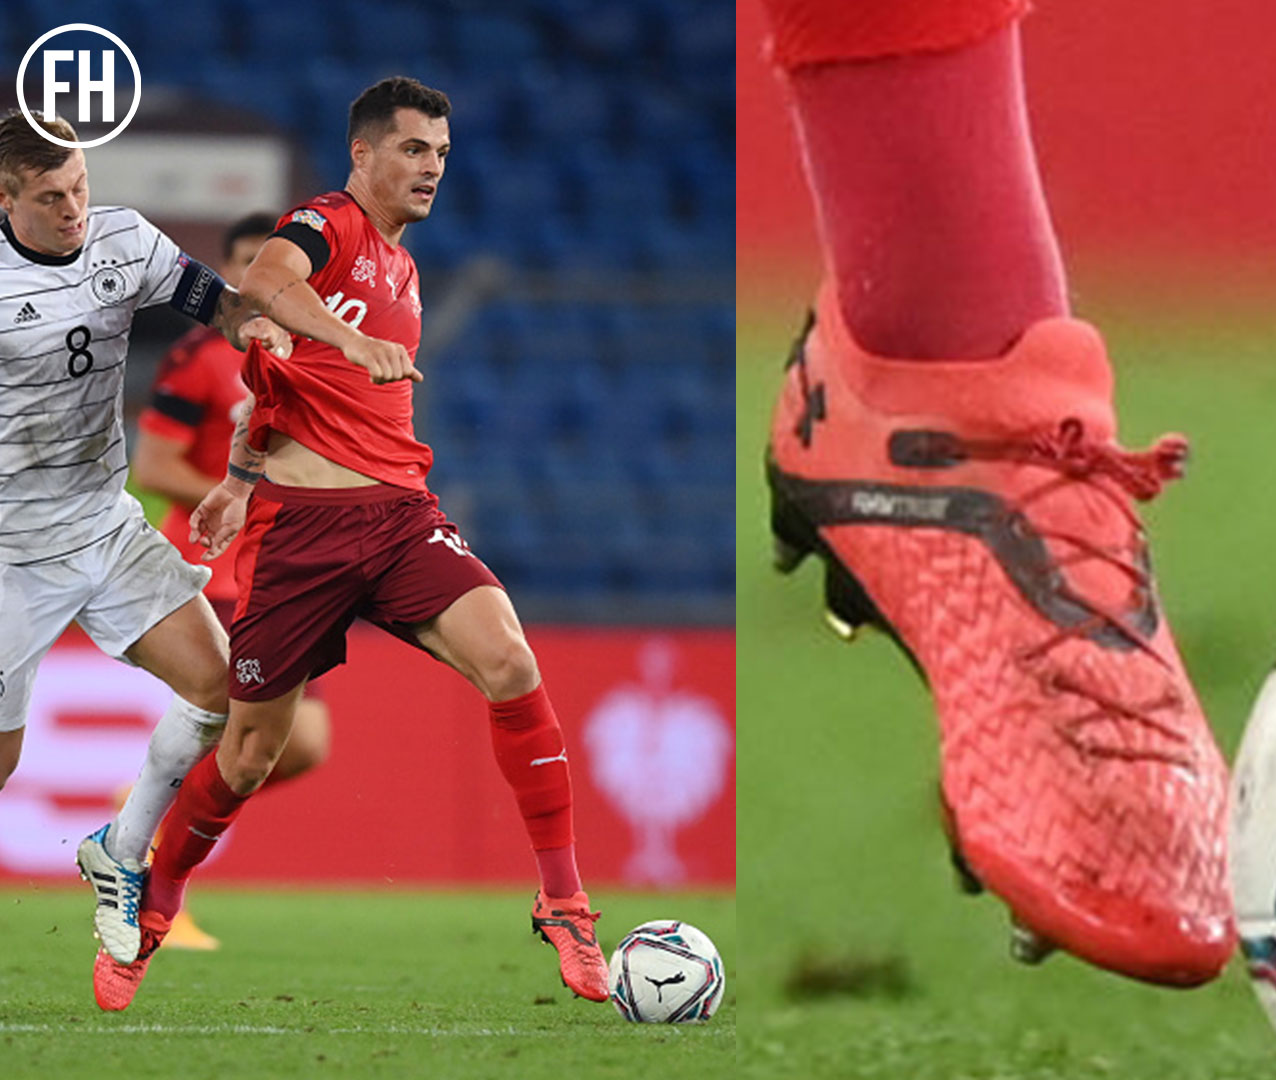 Boot Contract Incoming? Arsenal's Granit Xhaka Wears Branded Adidas ...